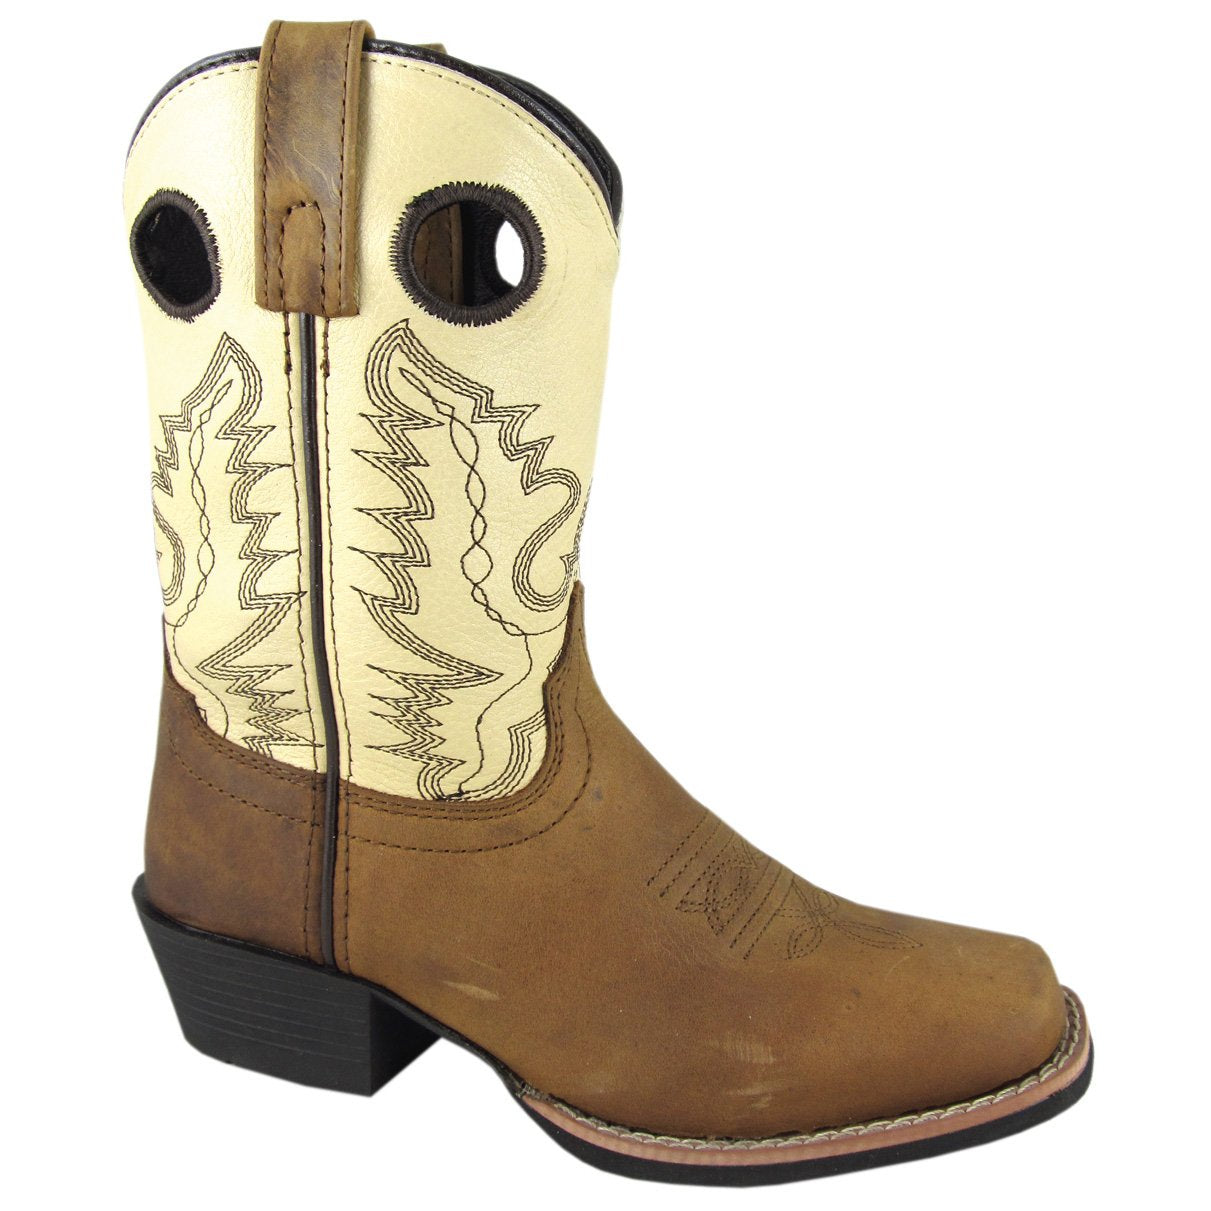 Smoky Mountain Youth Brown Distress/Cream Square Toe Boot